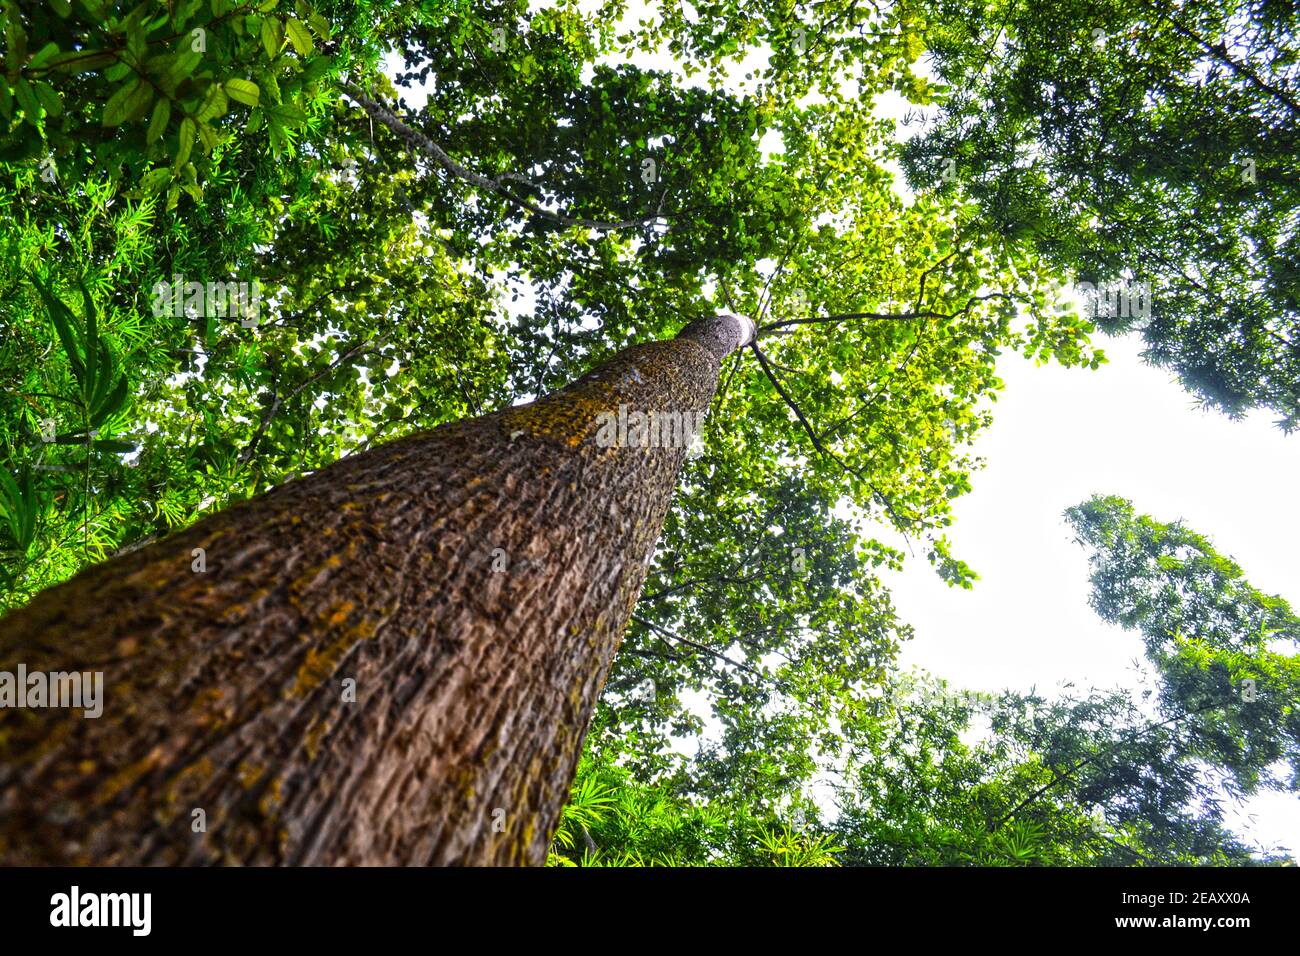 Green Forest Stockfoto